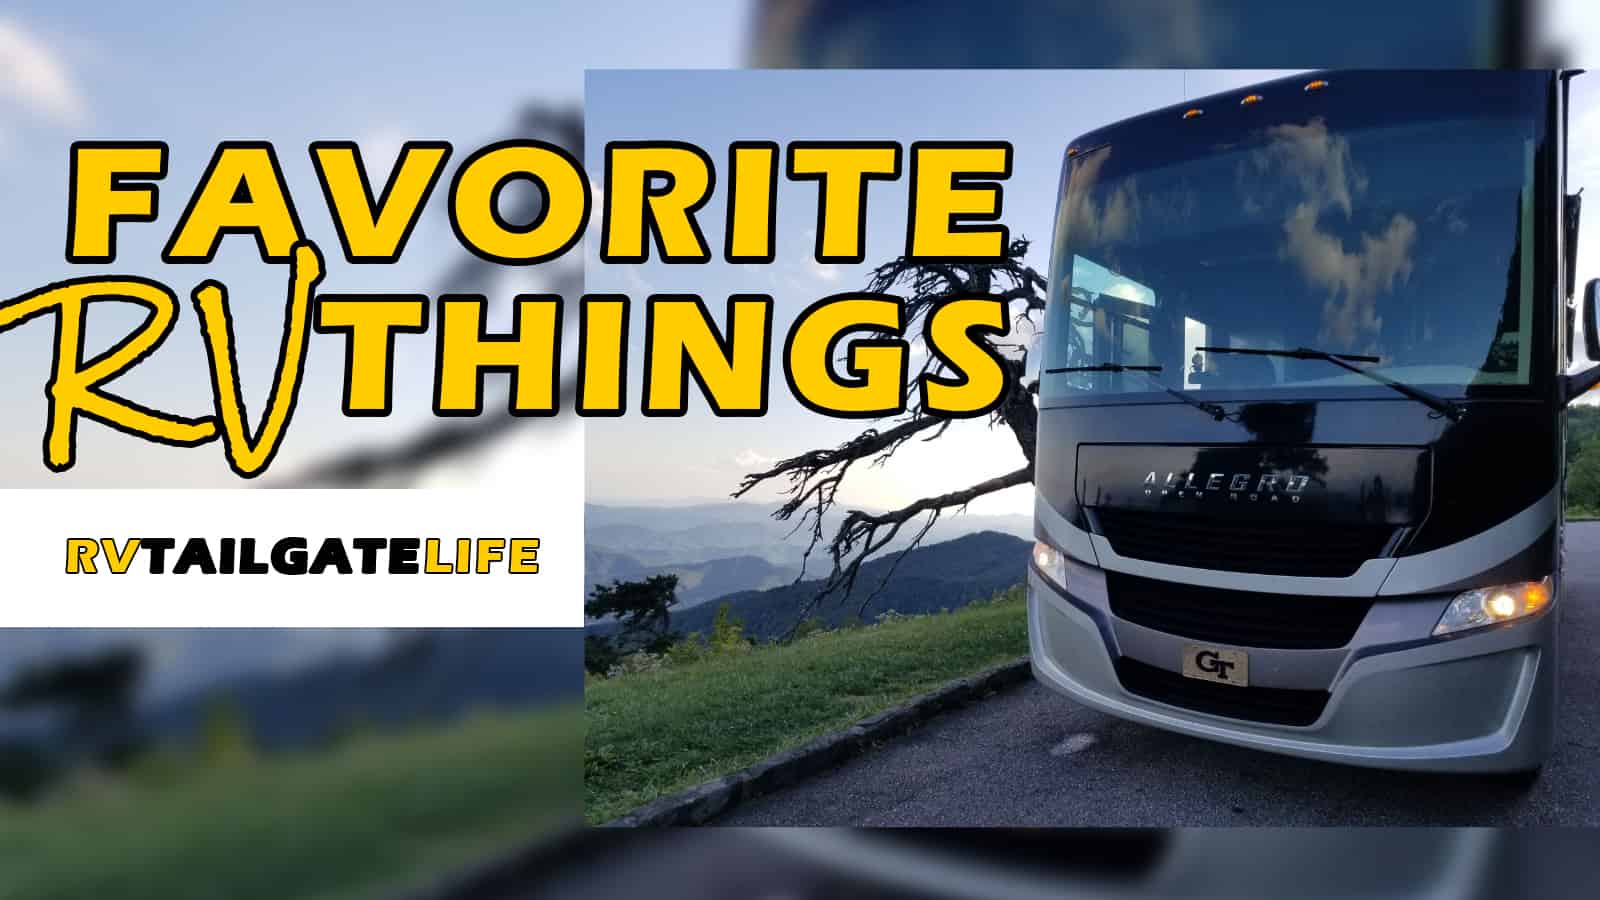 Favorite RV Things by RV Tailgate Life with a picture of a motorhome